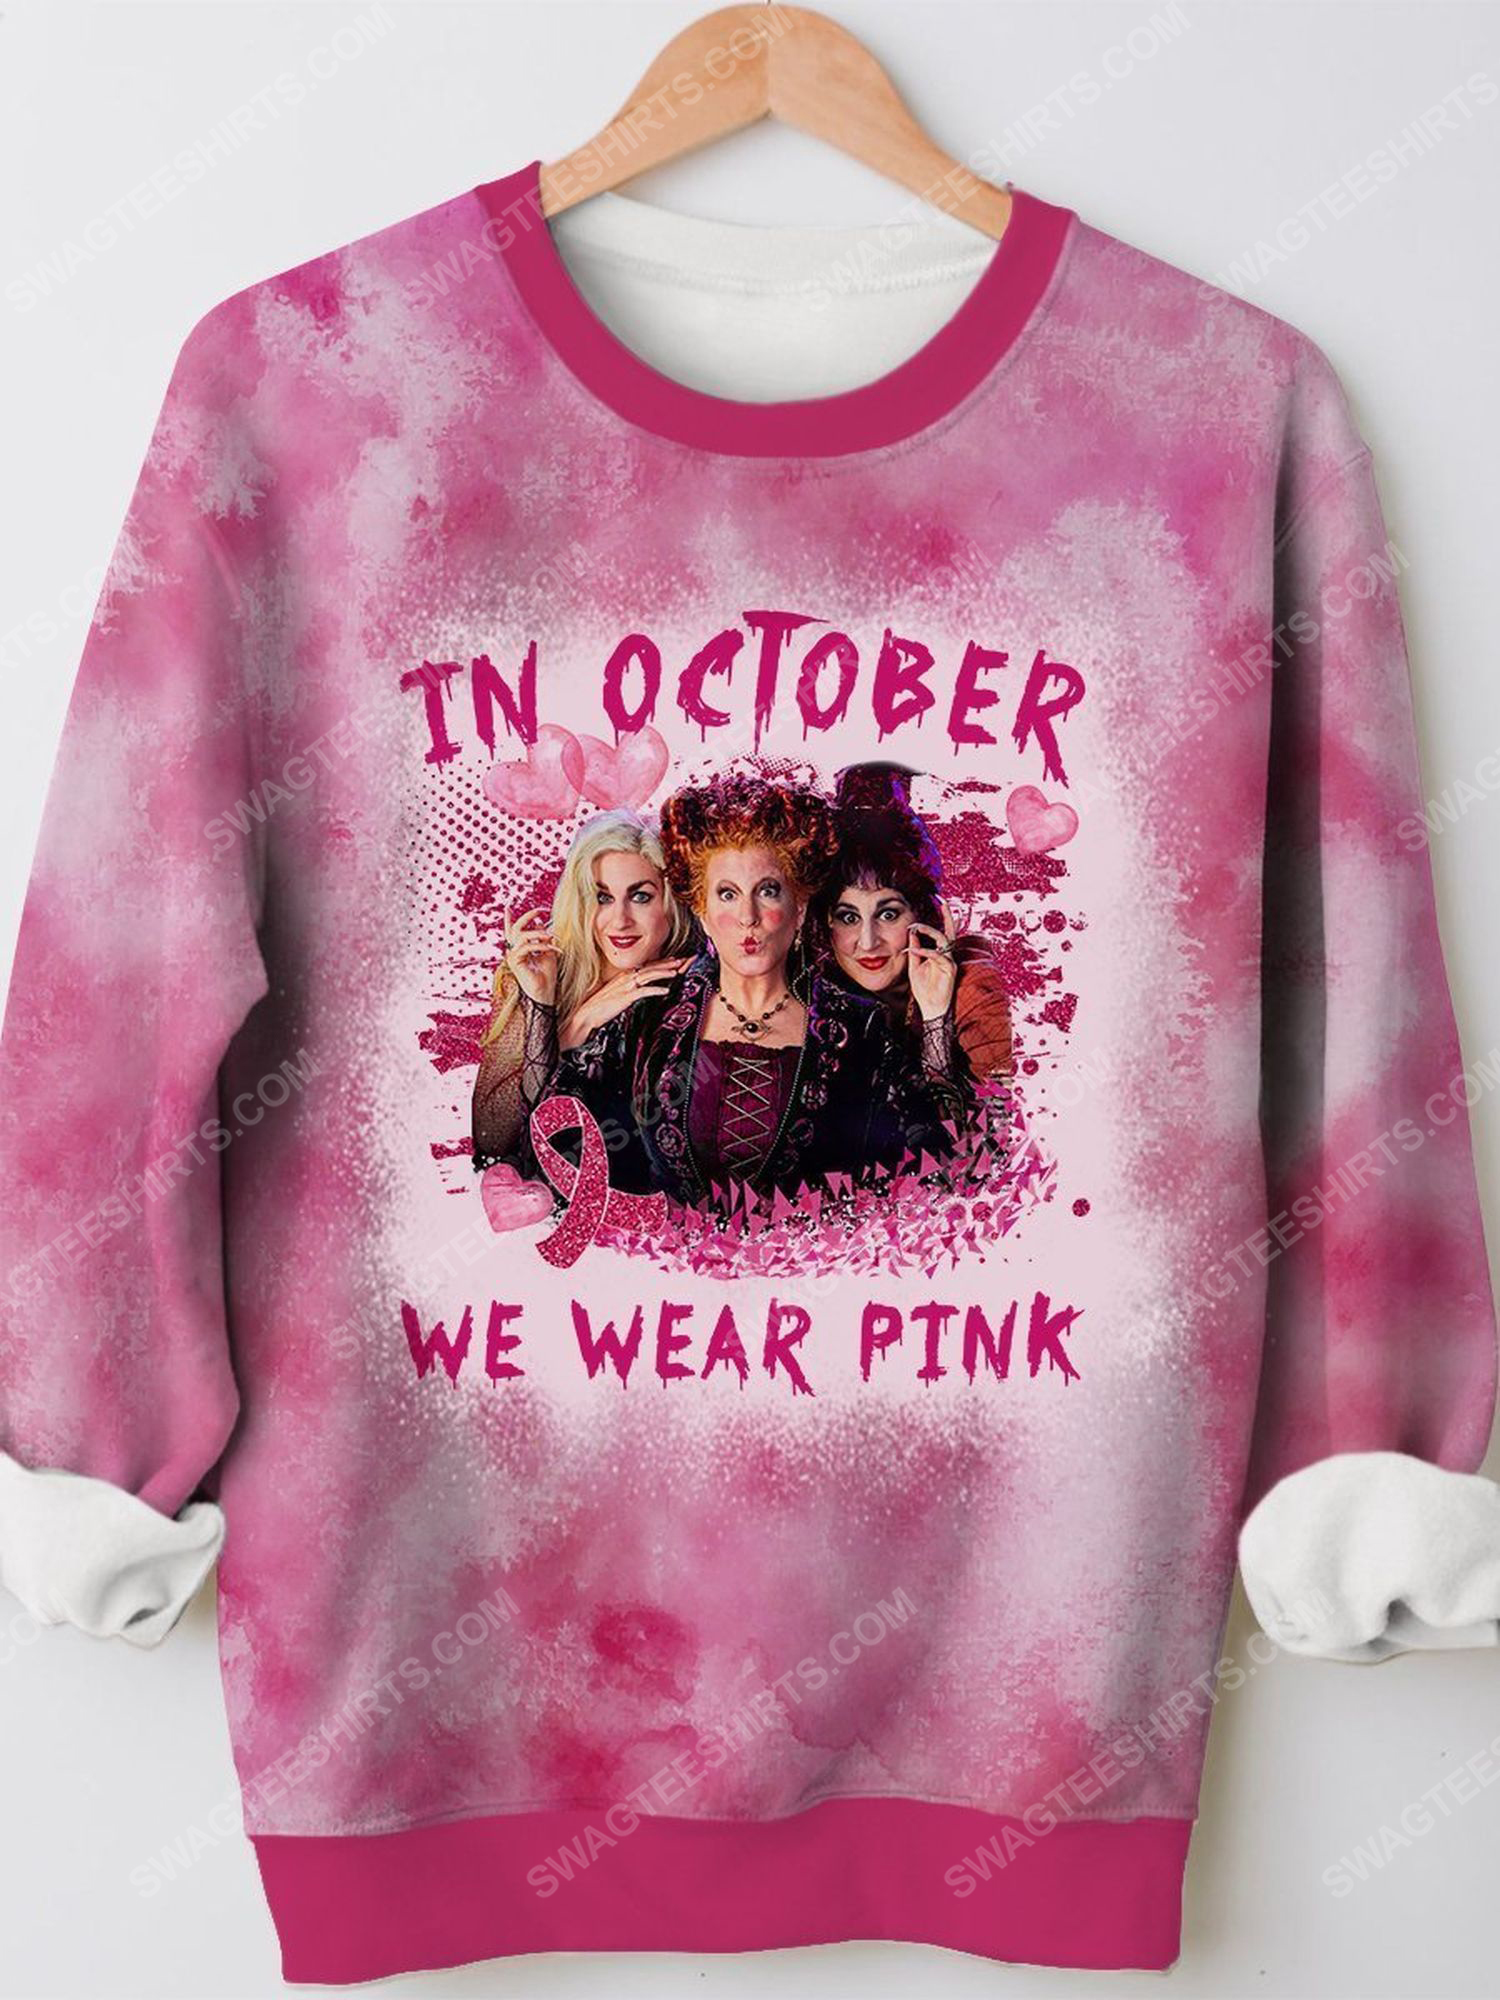 [special edition] Breast cancer awareness in october we wear pink hocus pocus tie dye shirt – maria (cancer)